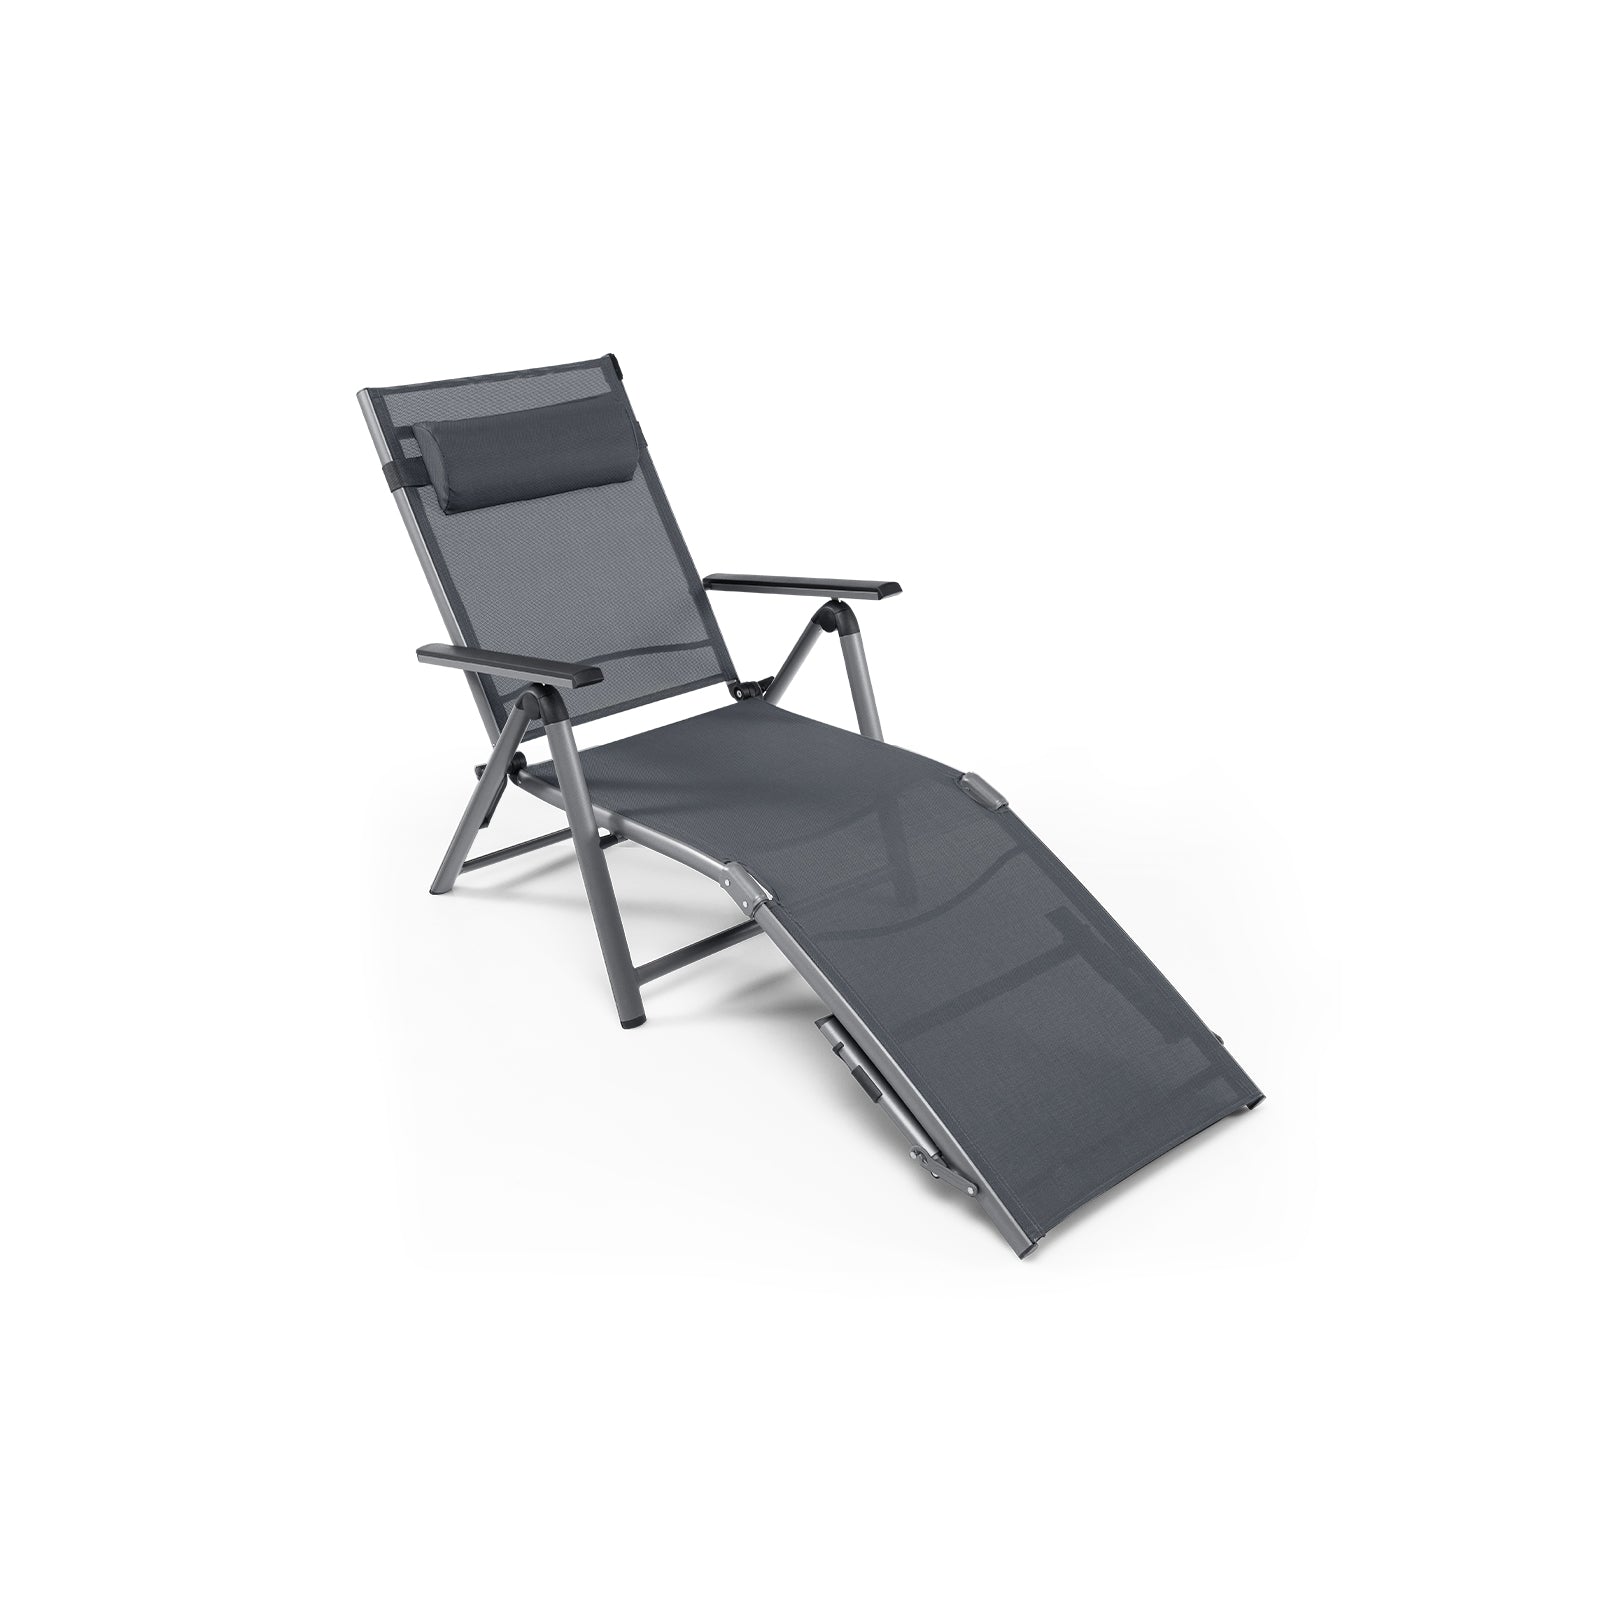 Outdoor Folding Chaise Lounge Chair with 8-Level Adjustable Backrests